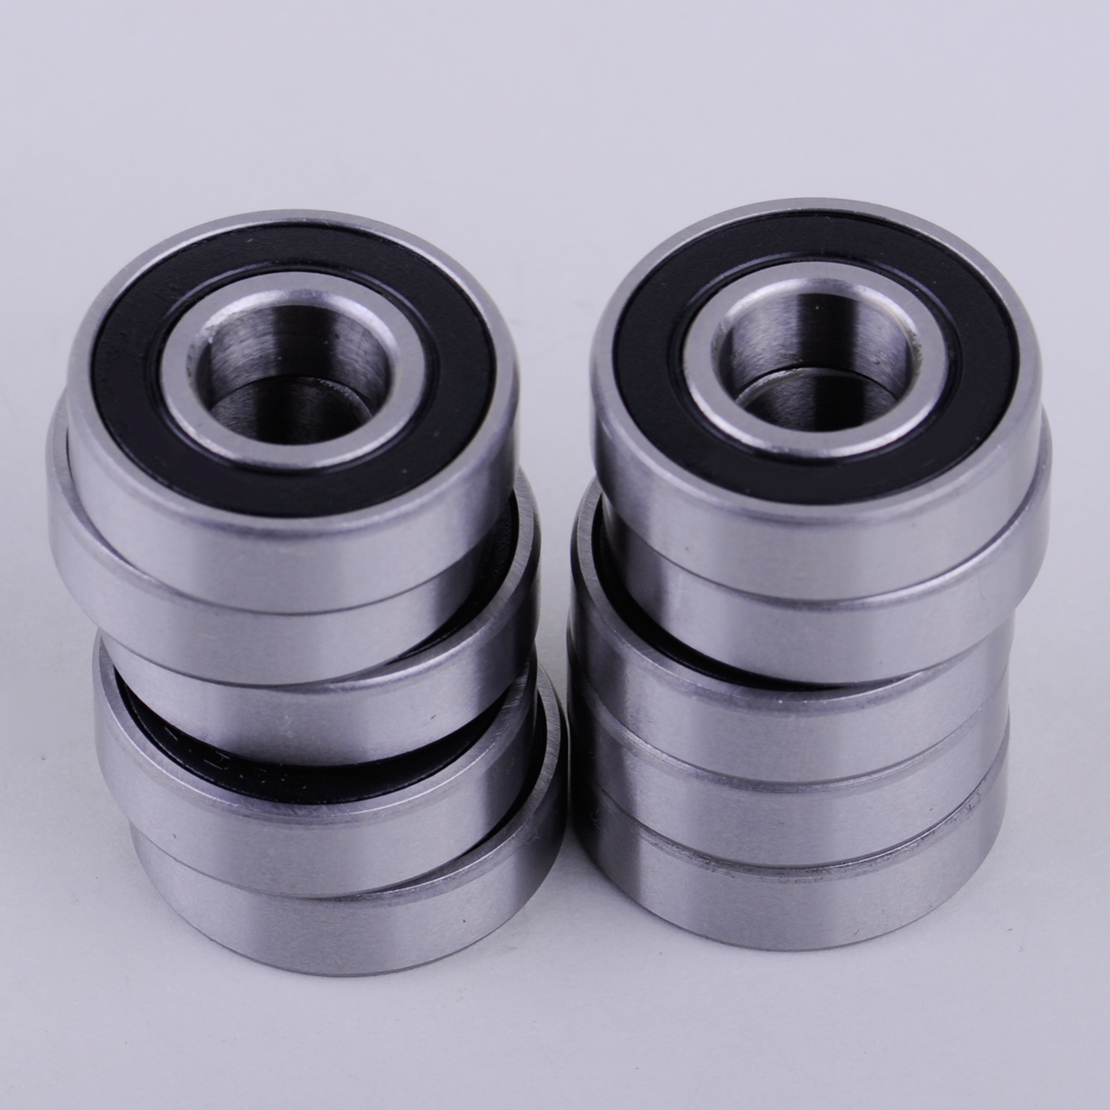 6001-2RS QUALITY RUBBER SEALED BEARING 12x28x8mm